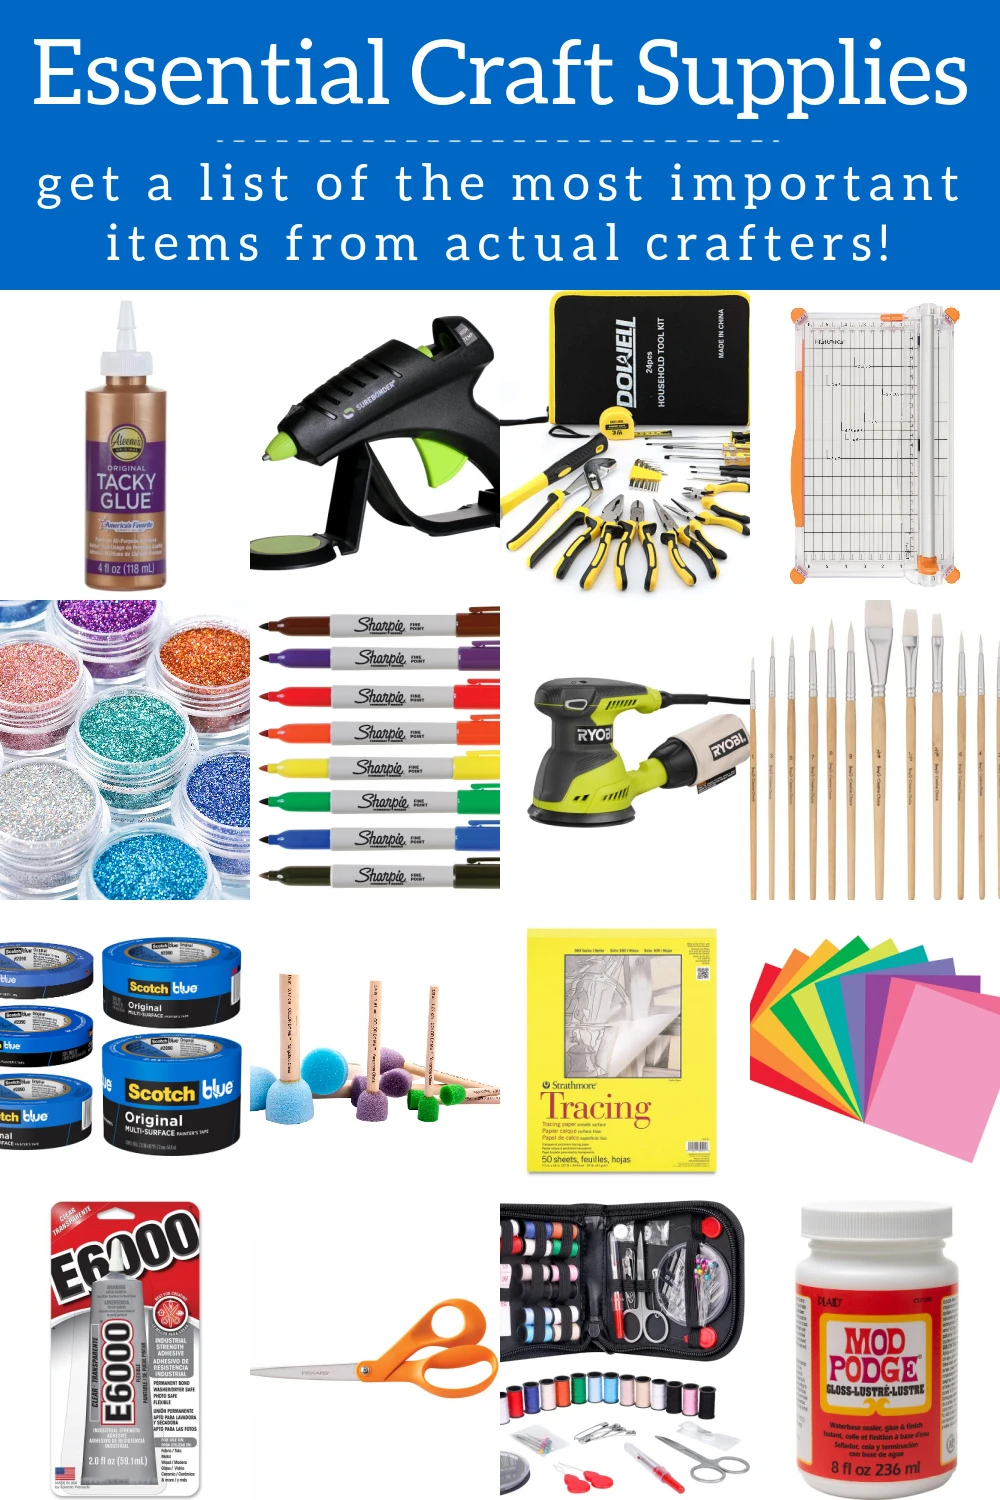 The Best Scrapbooking Tools and Materials